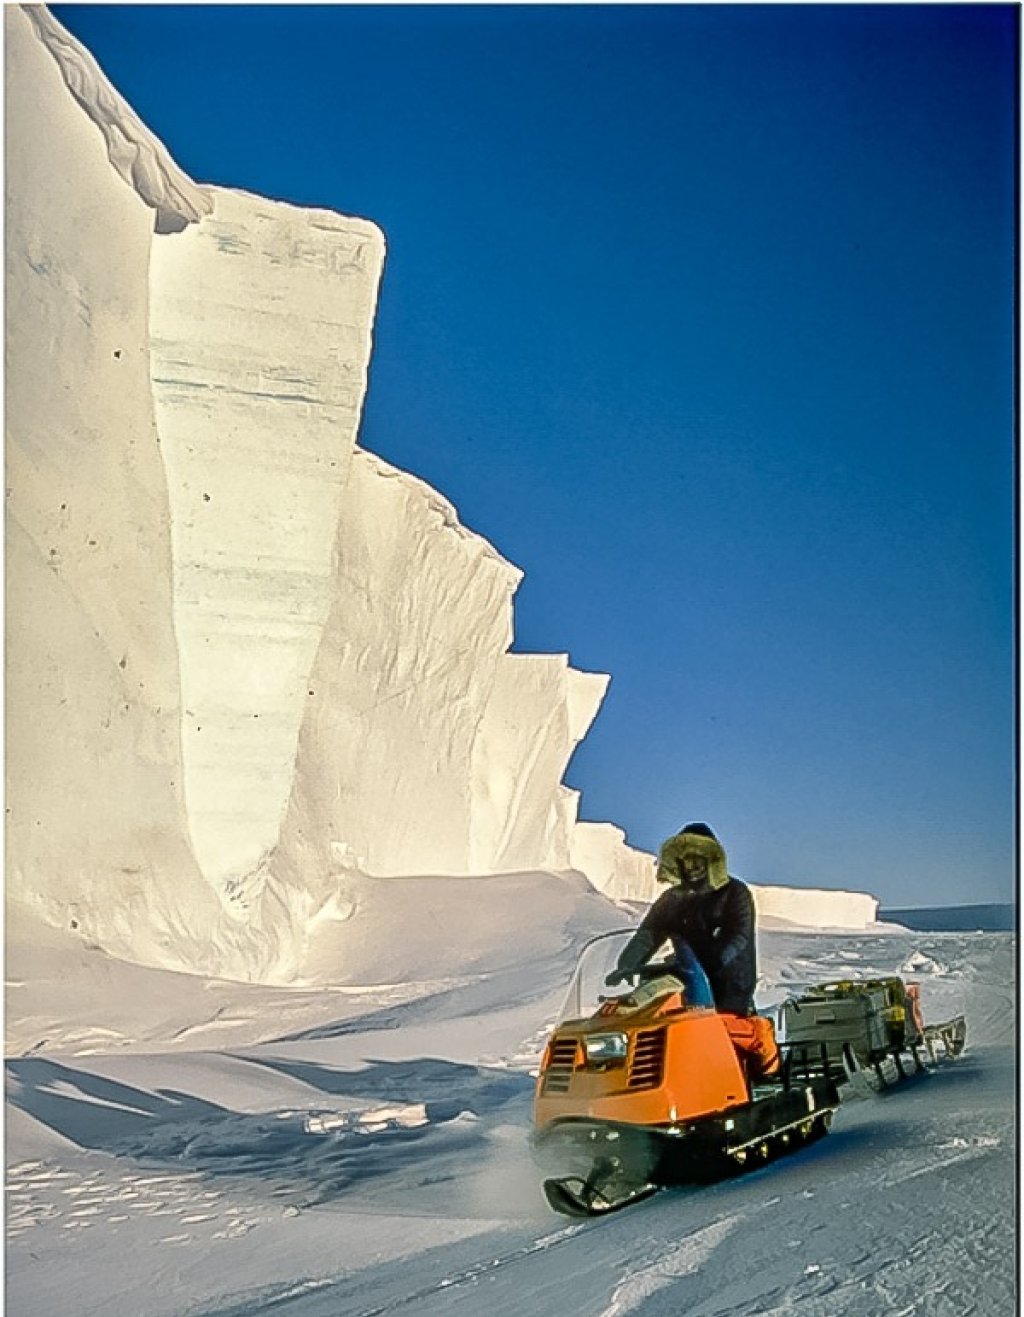 Rudi Mair during his research stay in the Antarctic.